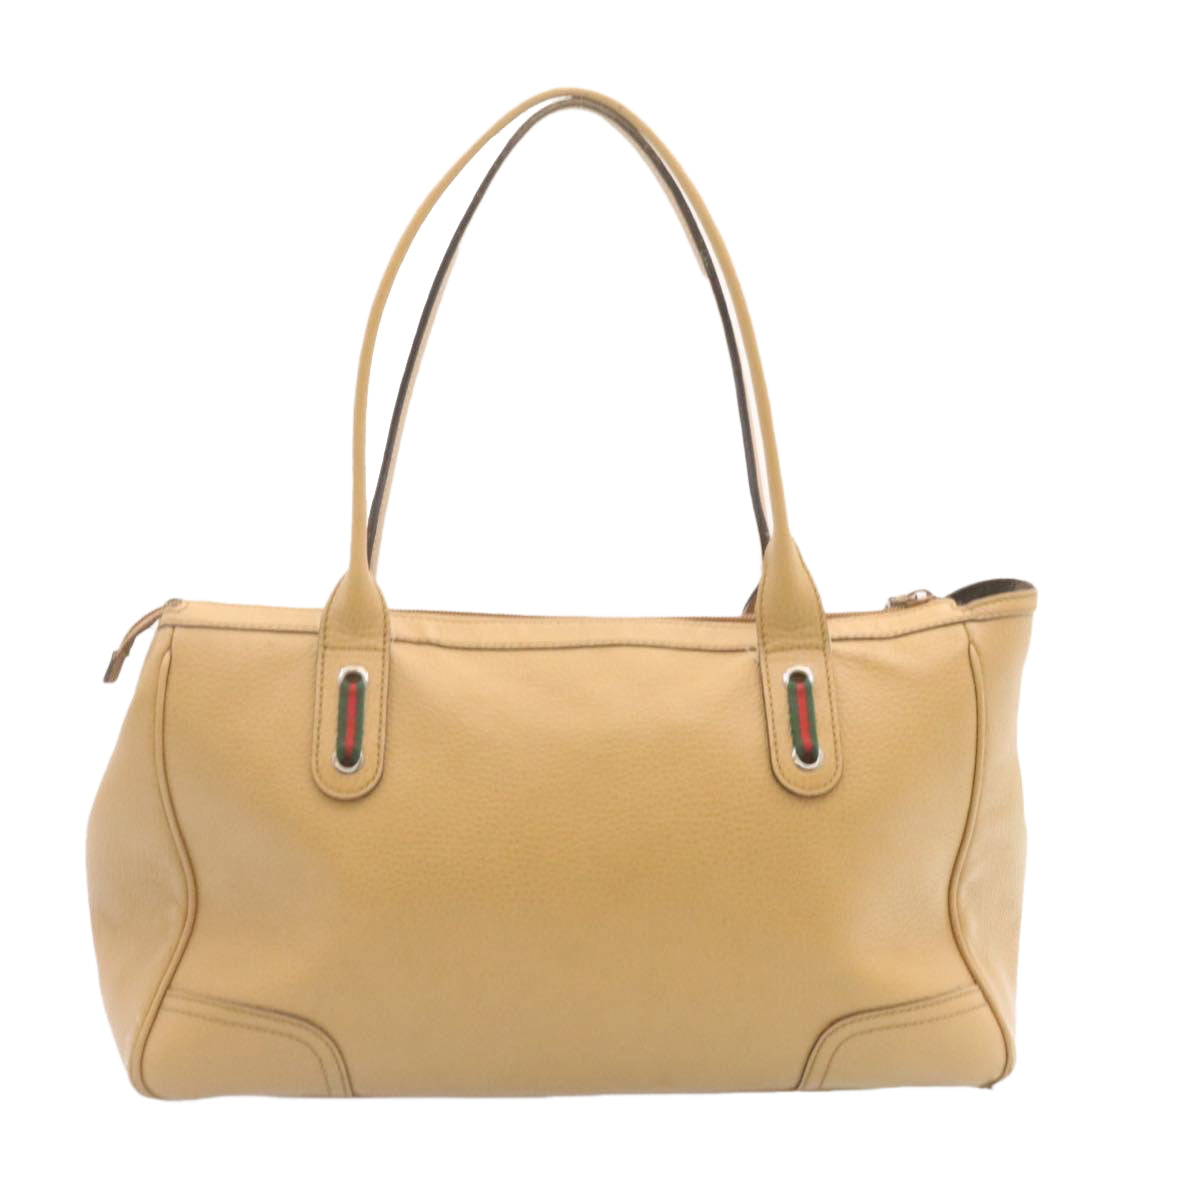 GUCCI Princy Line Tote Bag Leather Beige Auth am1445g